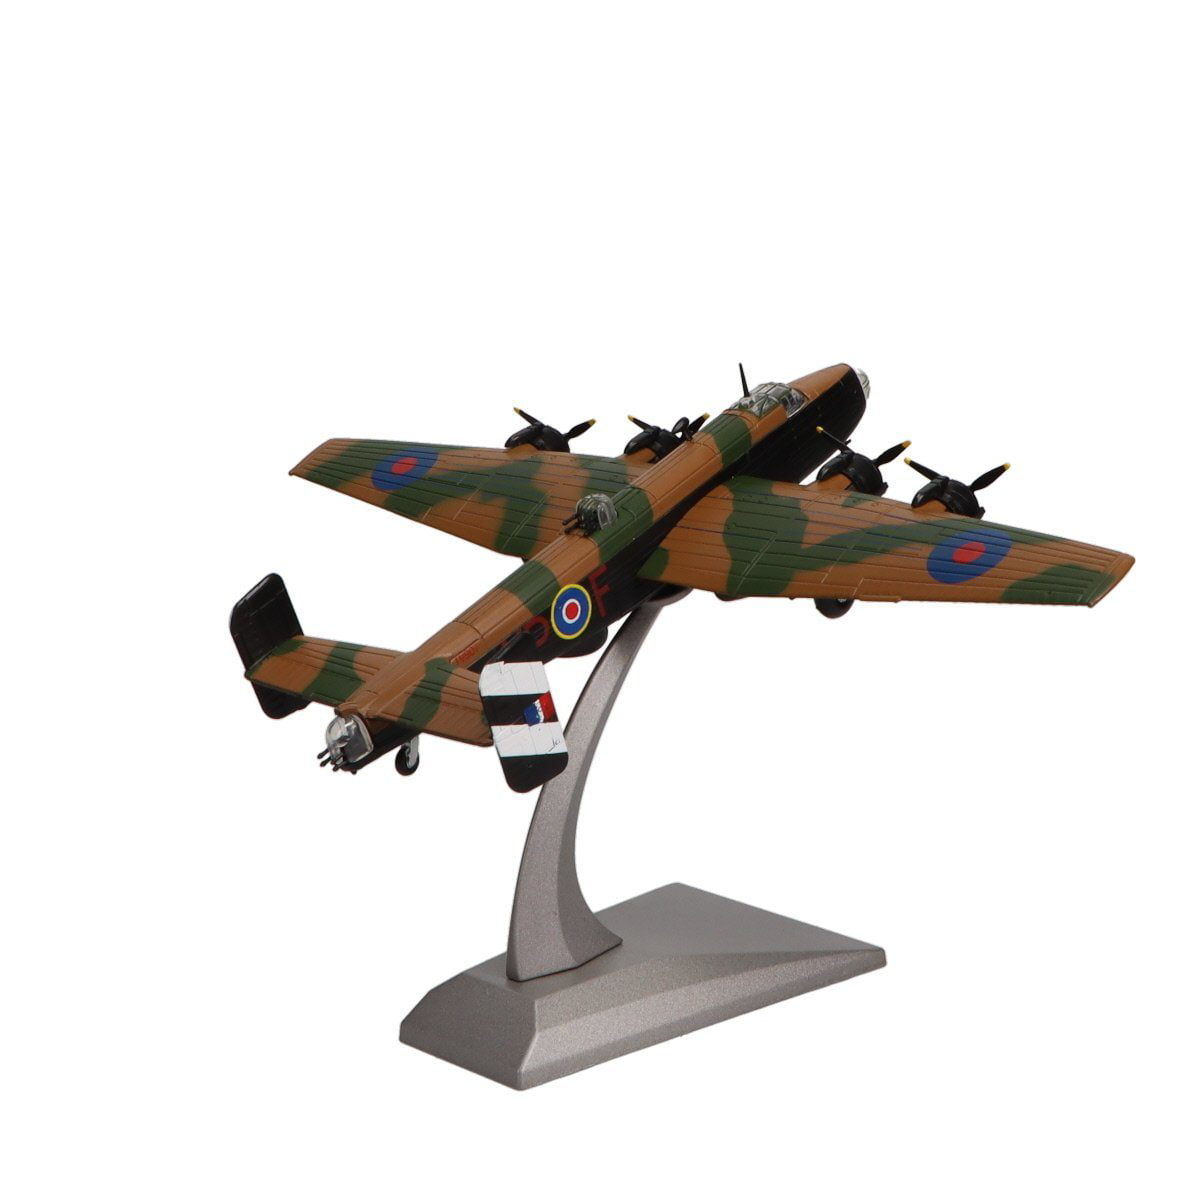 1/144 Handley Page Halifax B Mk III Aircraft Plane Toy Home Decor Collection 